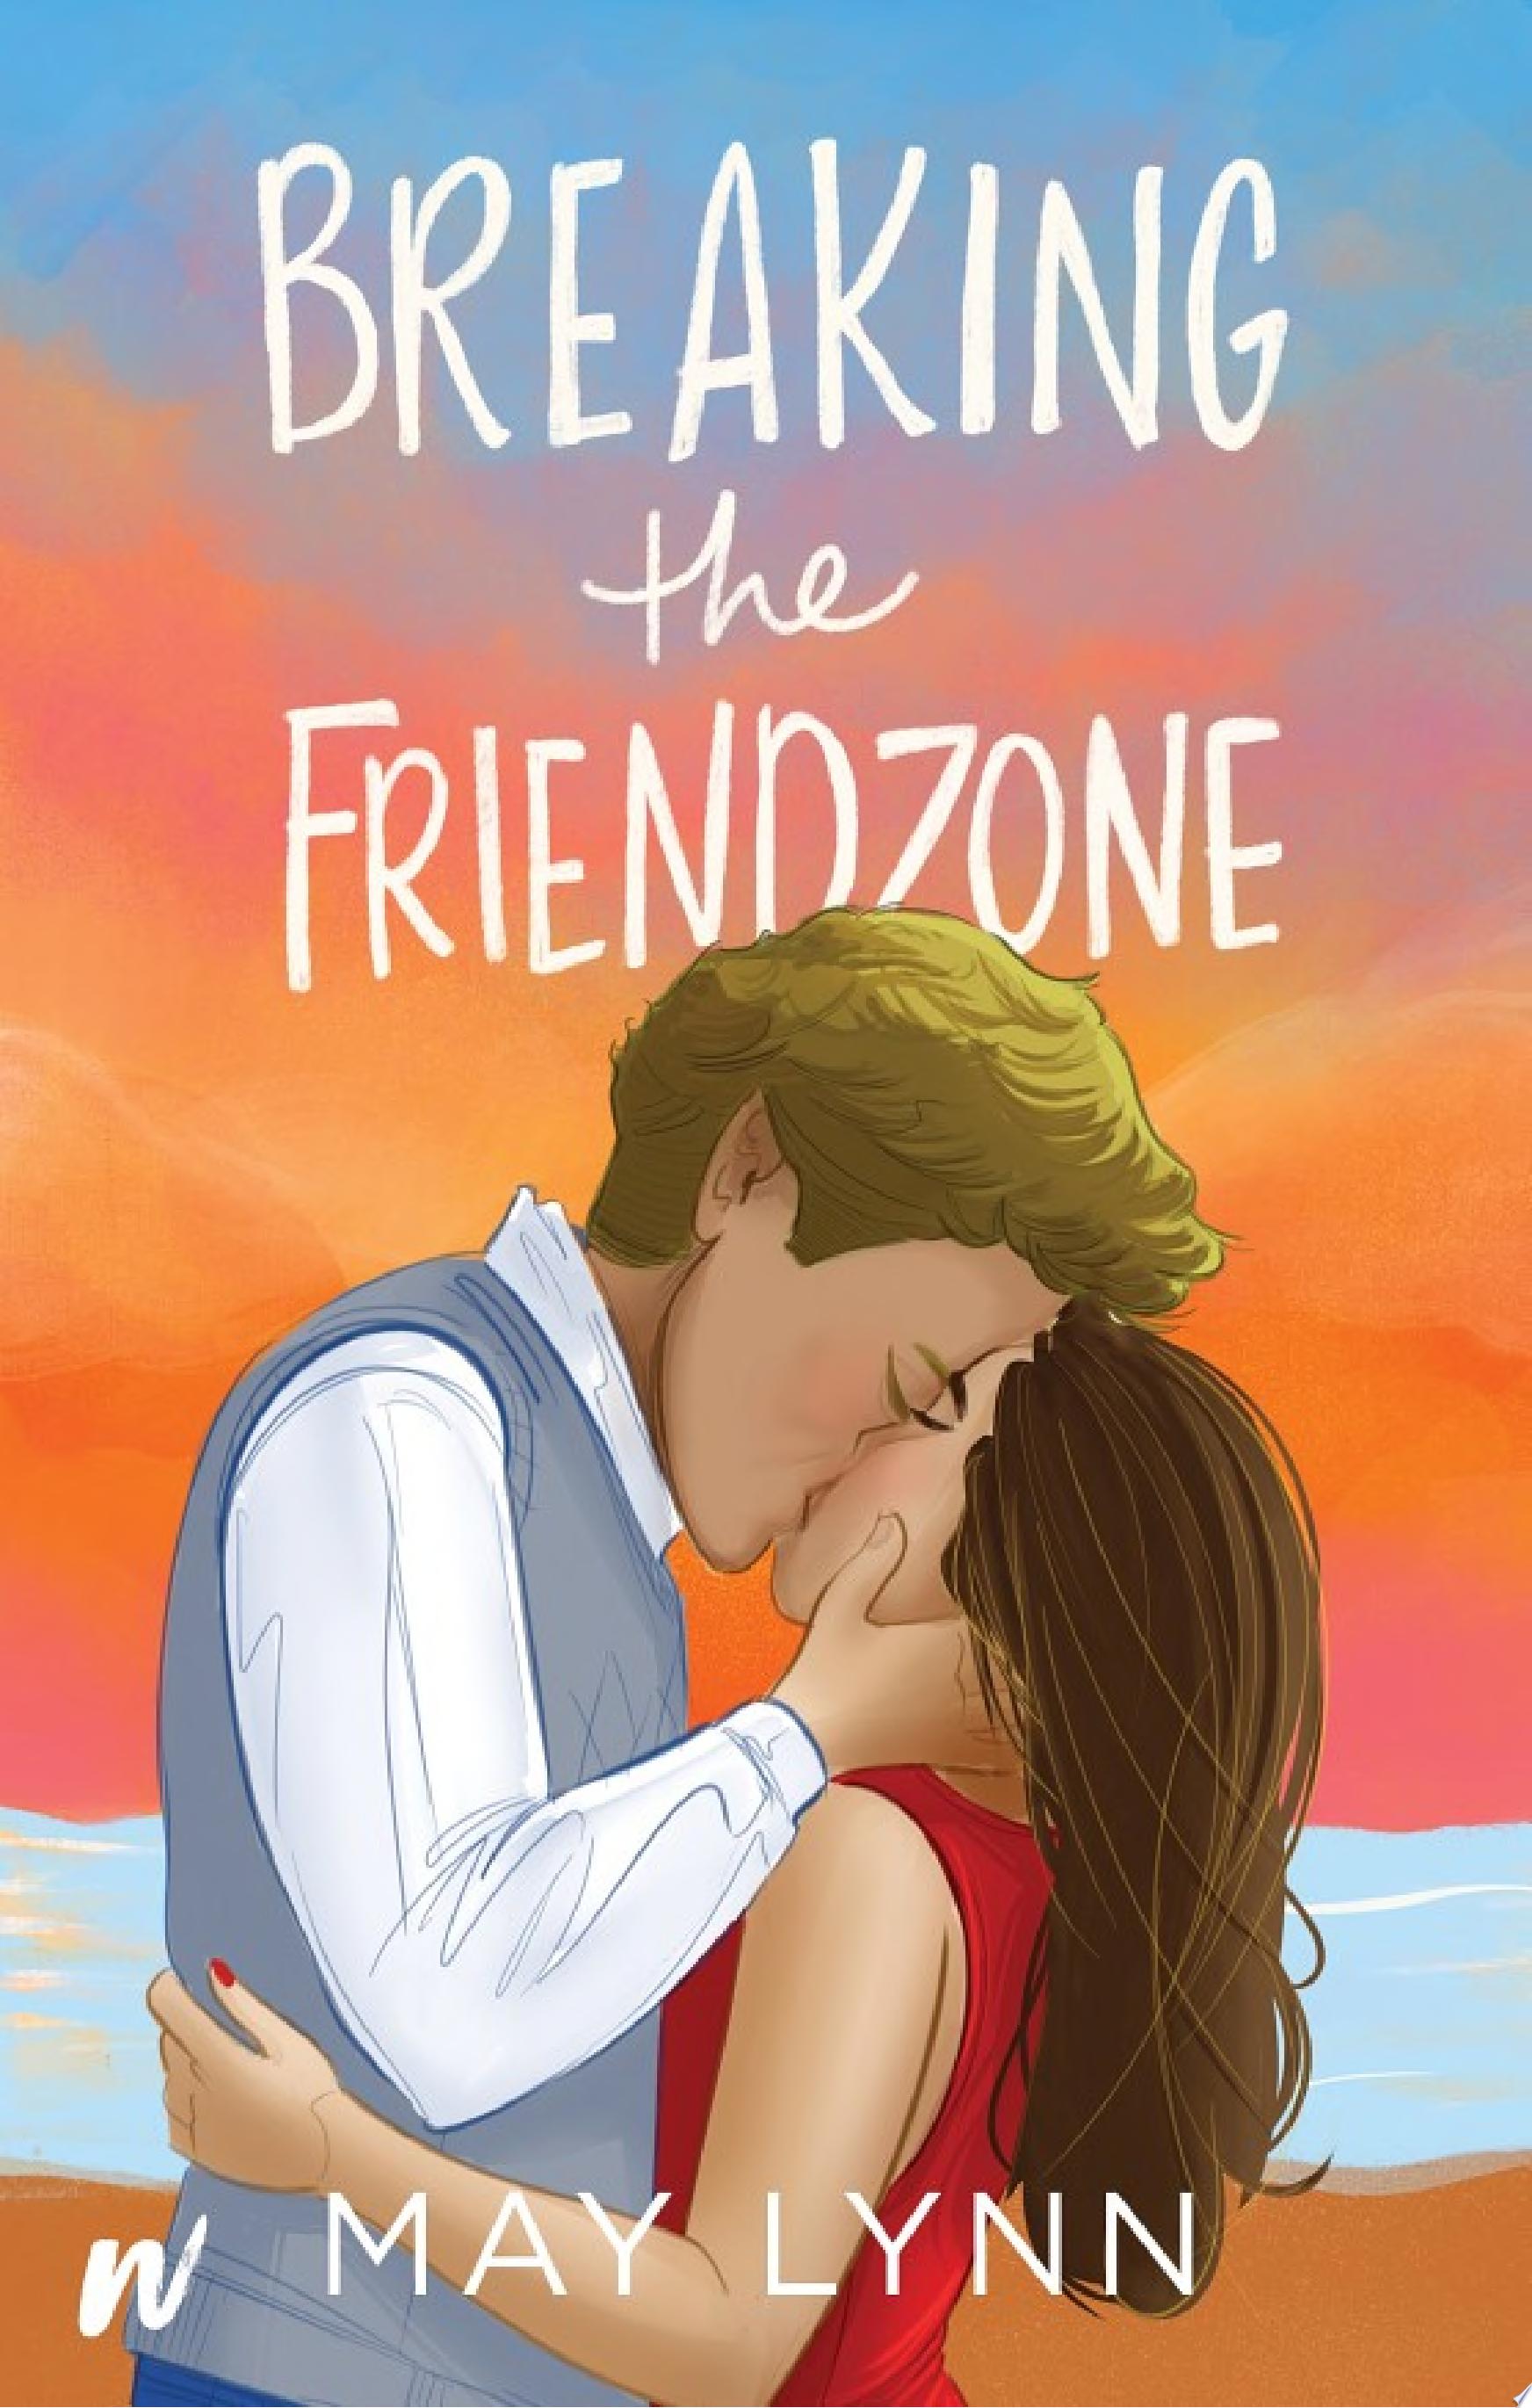 Image for "Breaking the Friendzone"